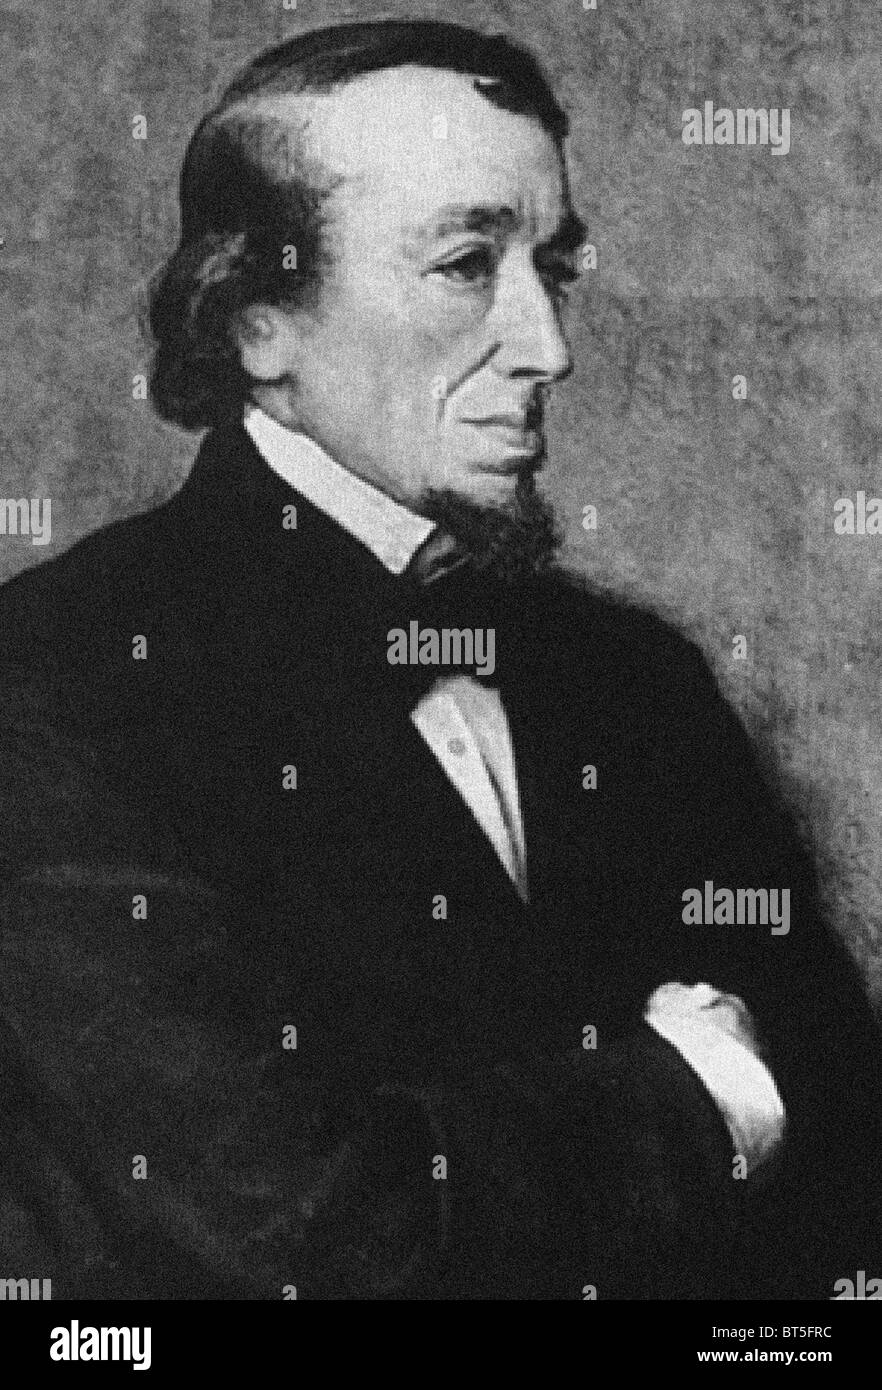 Benjamin Disraeli, 1st Earl of Beaconsfield, KG, PC, FRS, (21 December 1804 – 19 April 1881) was a British Prime Minister. From the archives of Press Portrait Service (formerly Press Portrait Bureau) Stock Photo